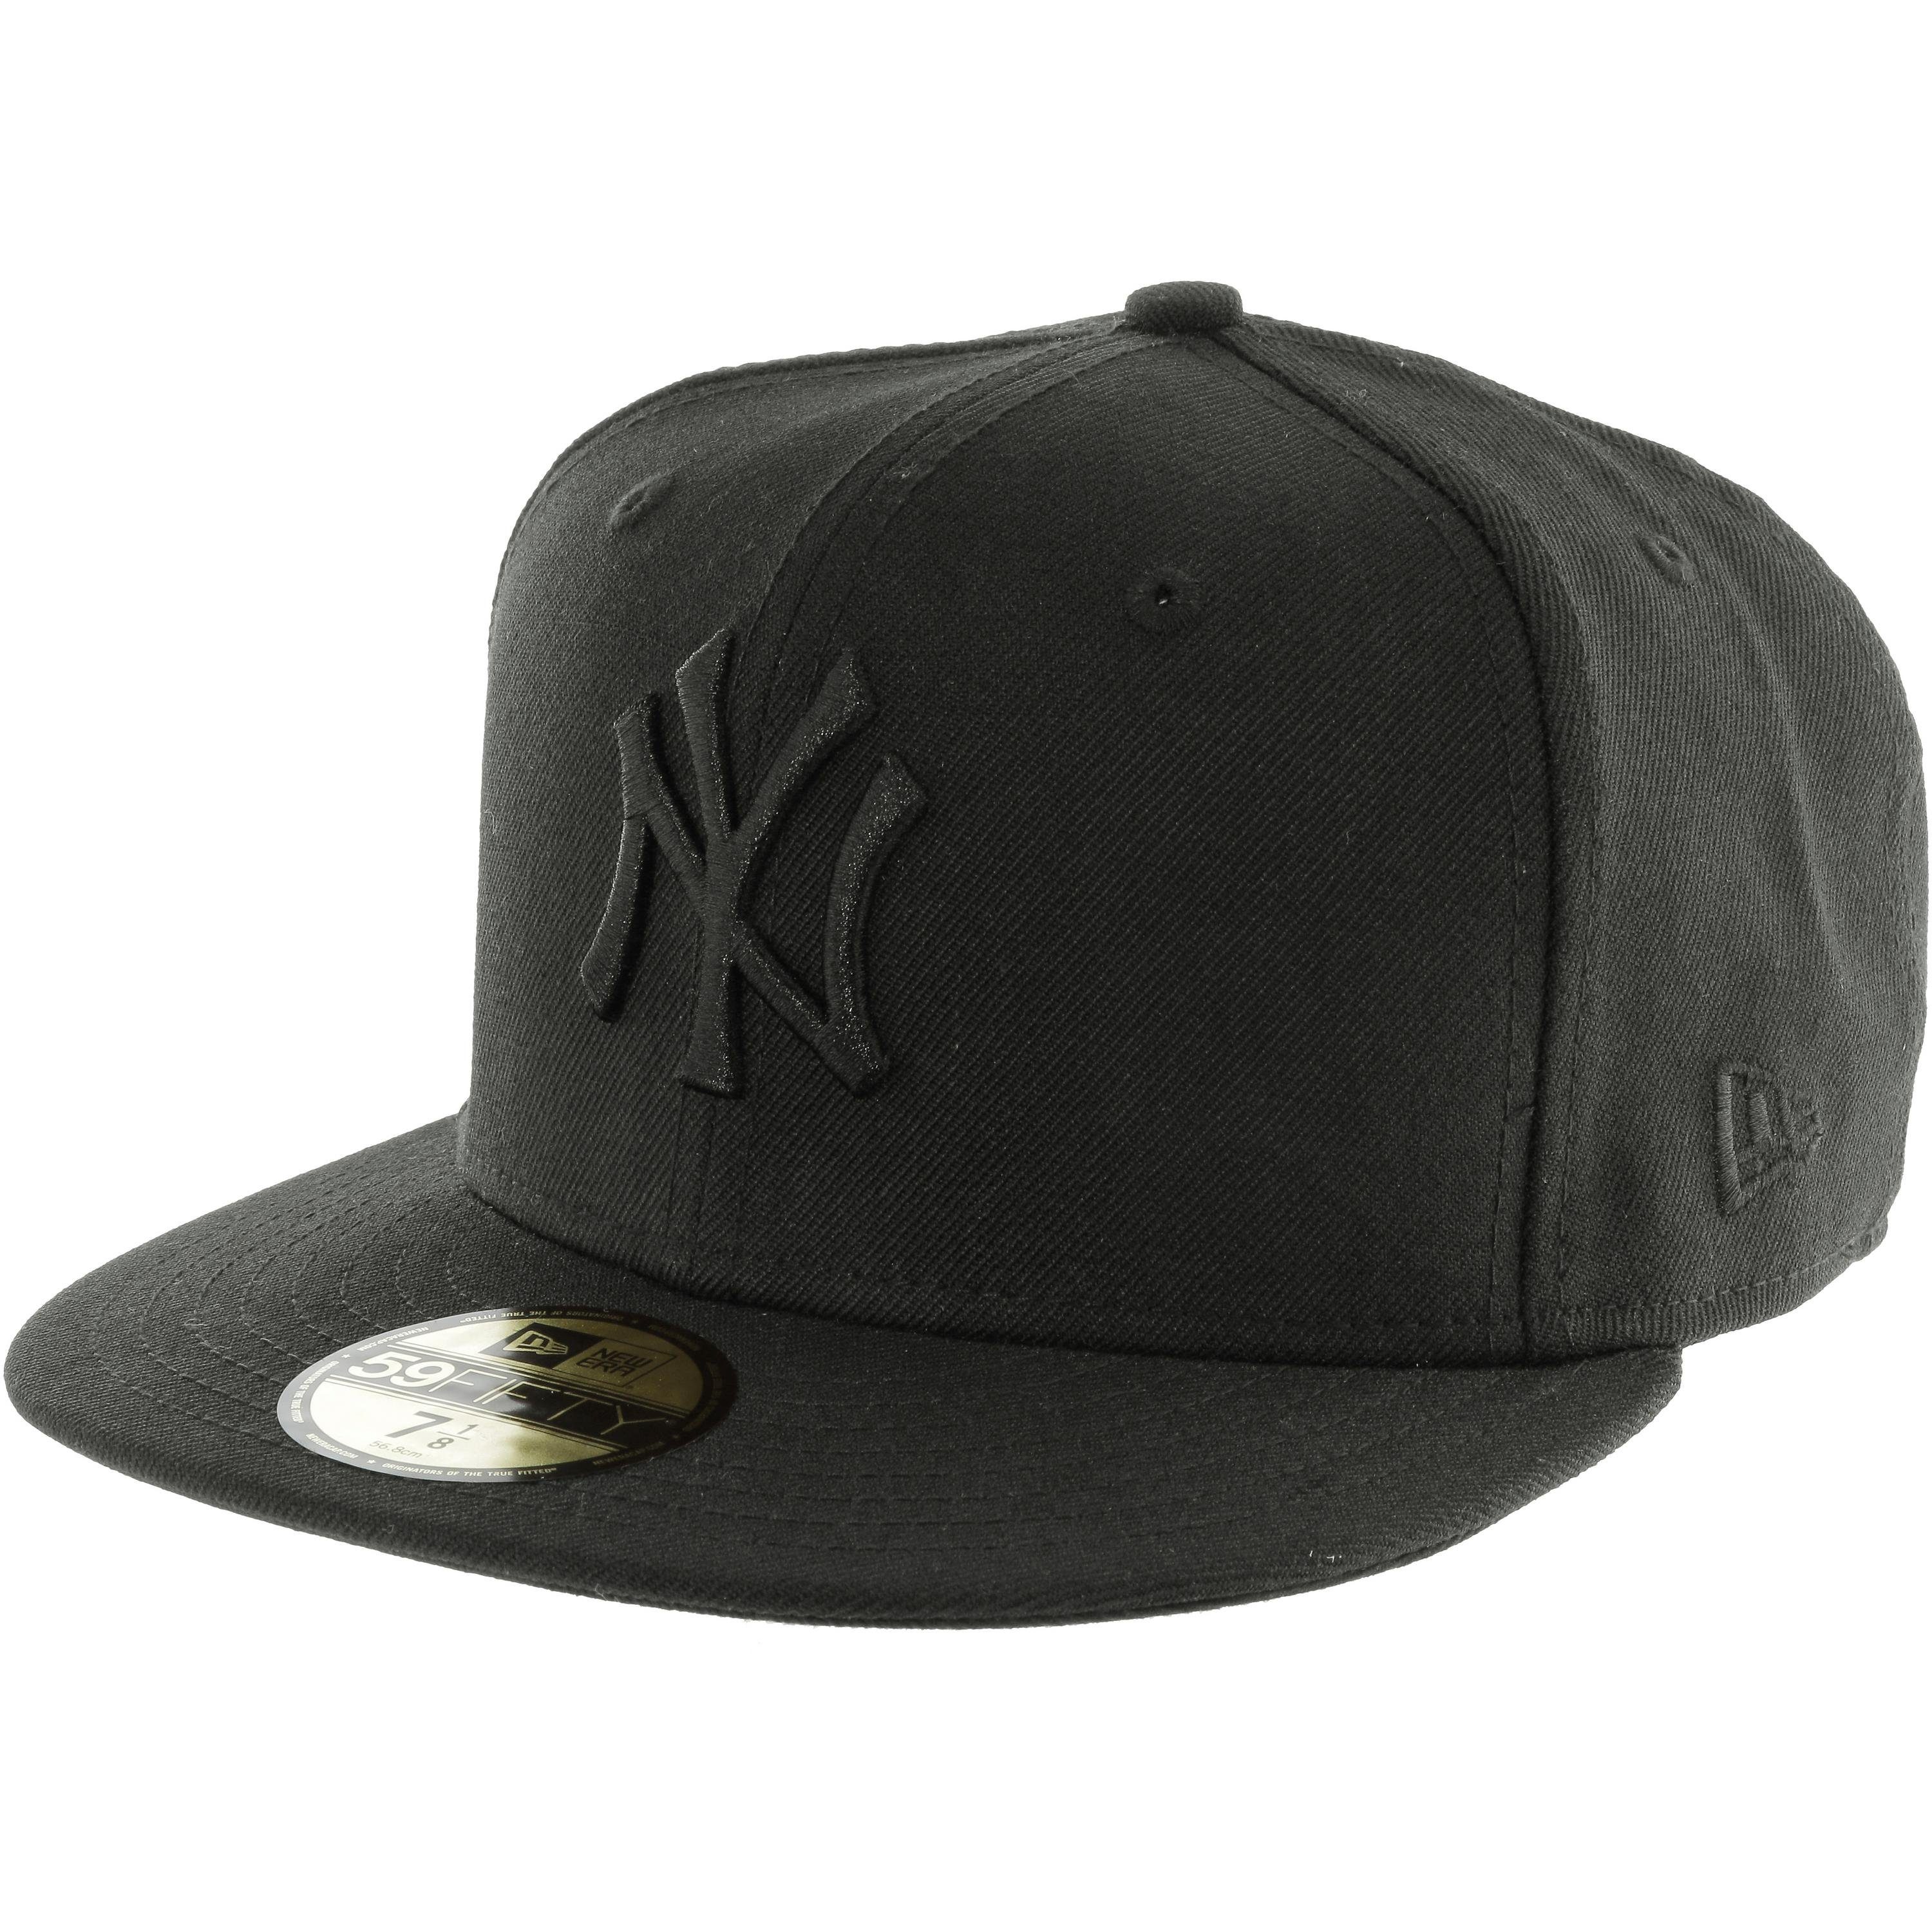 Yankees Fitted Cap 59fifty Era New NY schwarz